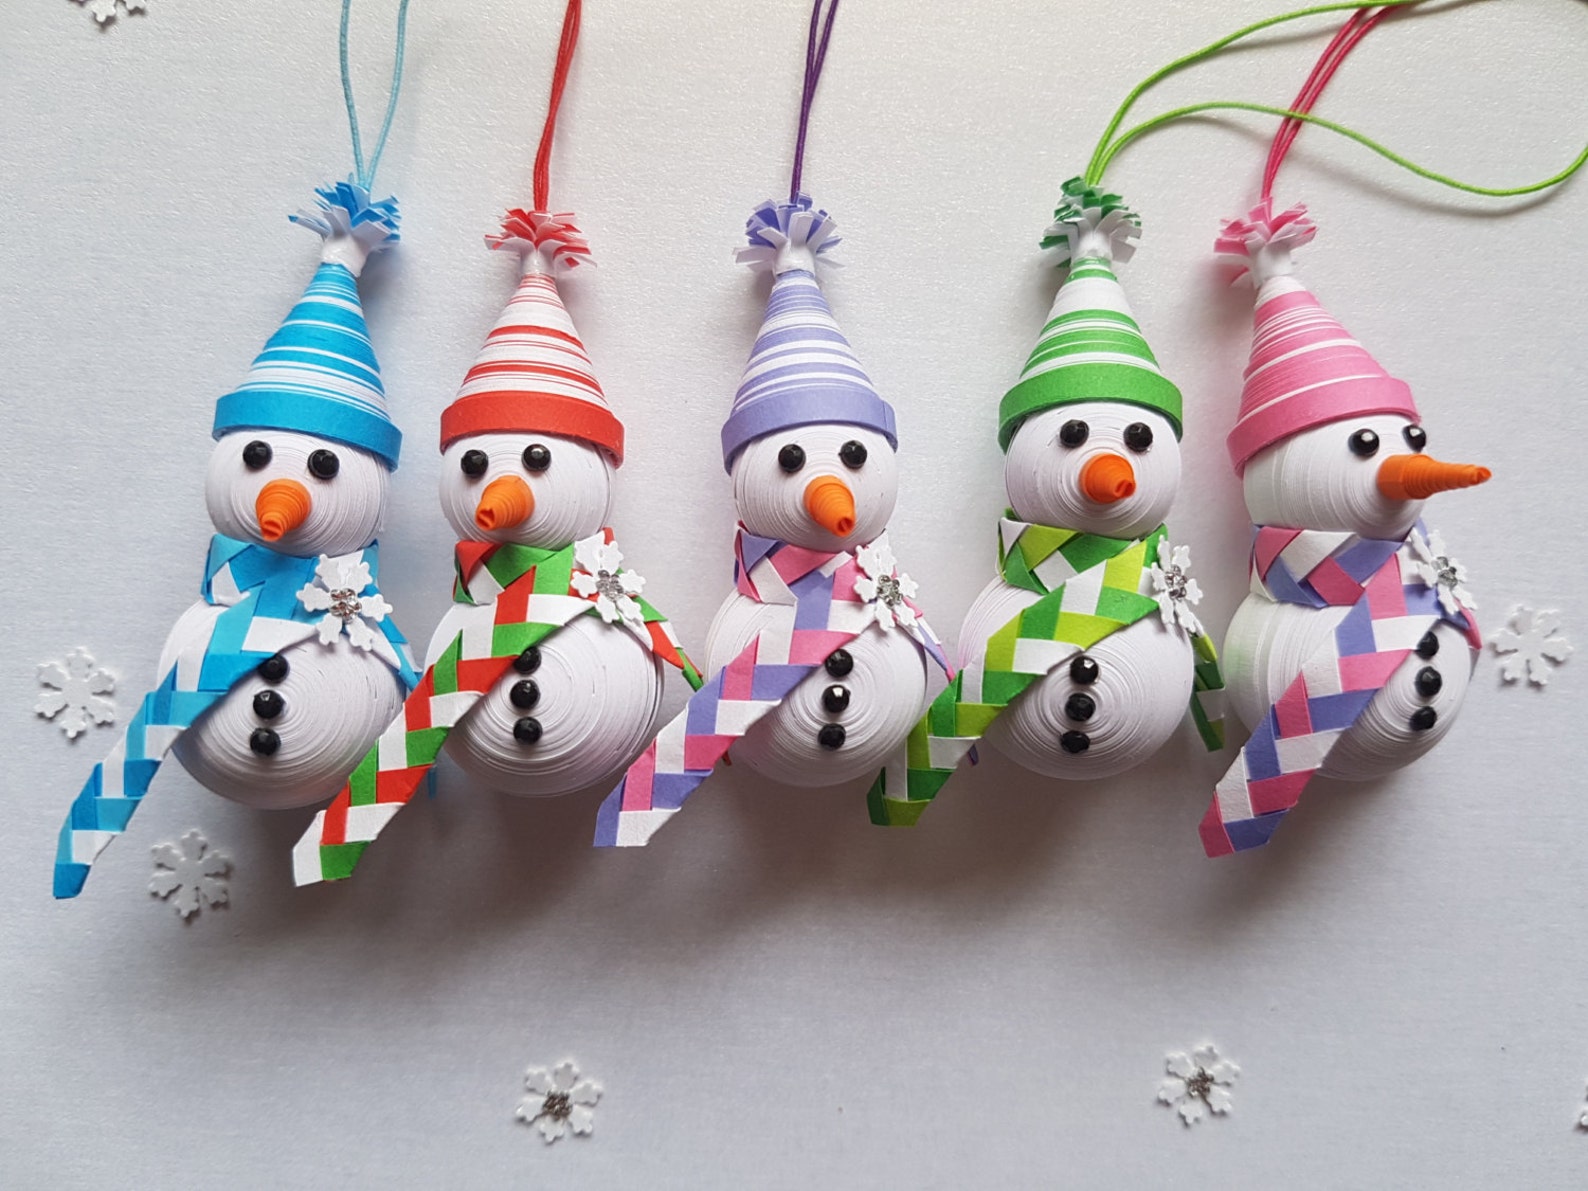 Paper Quilled Snowman with a cross hatched scarf and a | Etsy